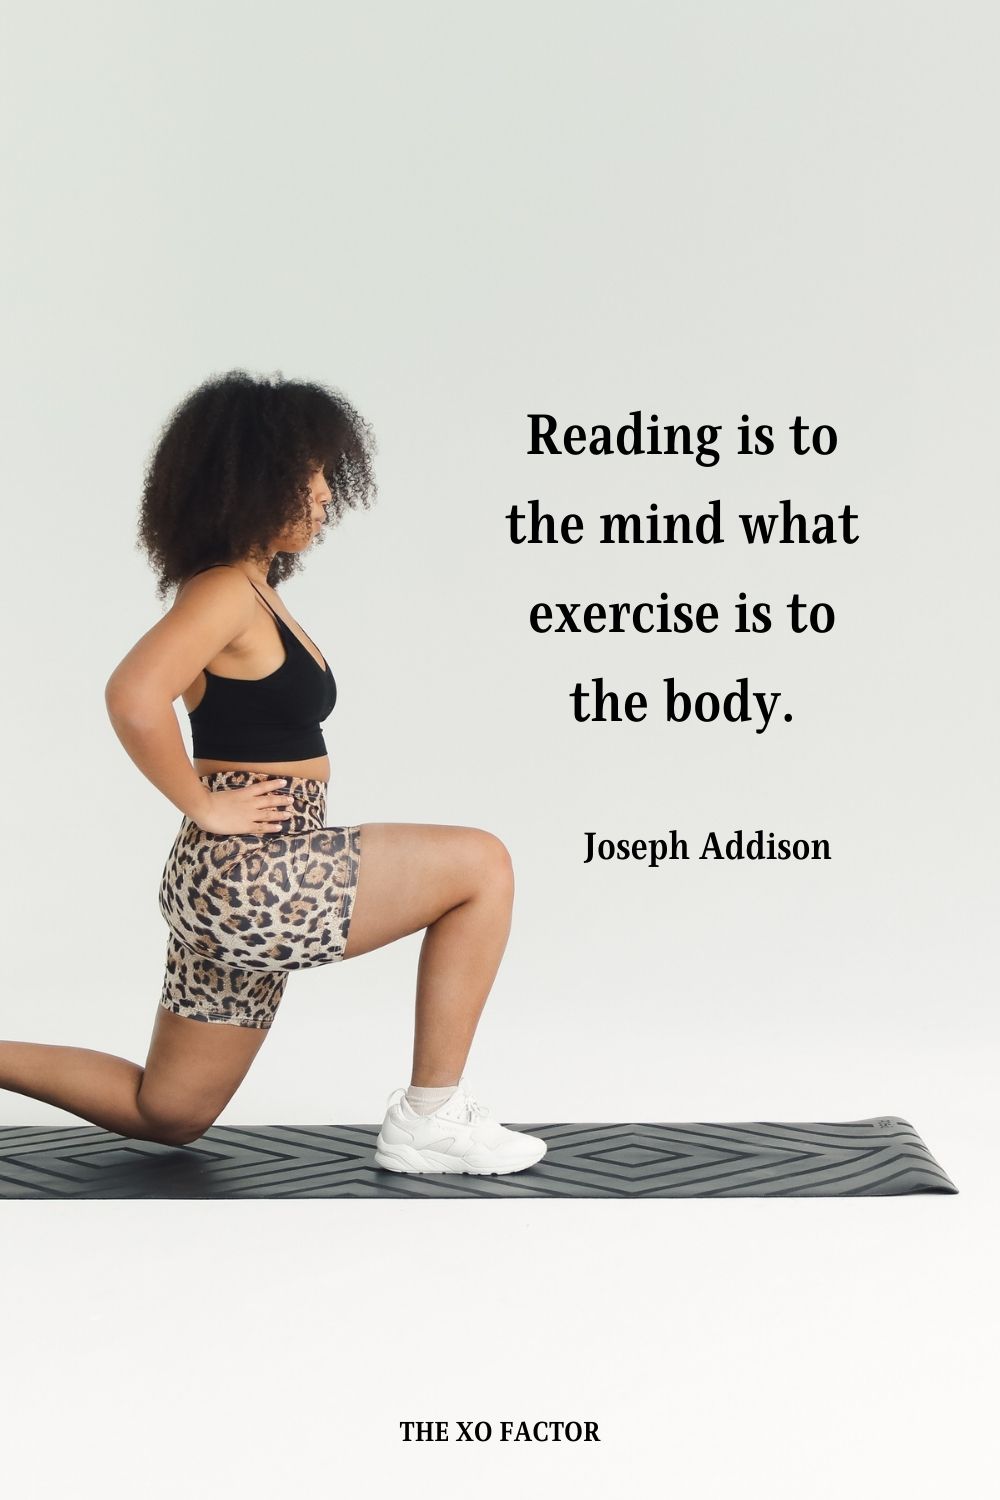 Reading is to the mind what exercise is to the body. Joseph Addison